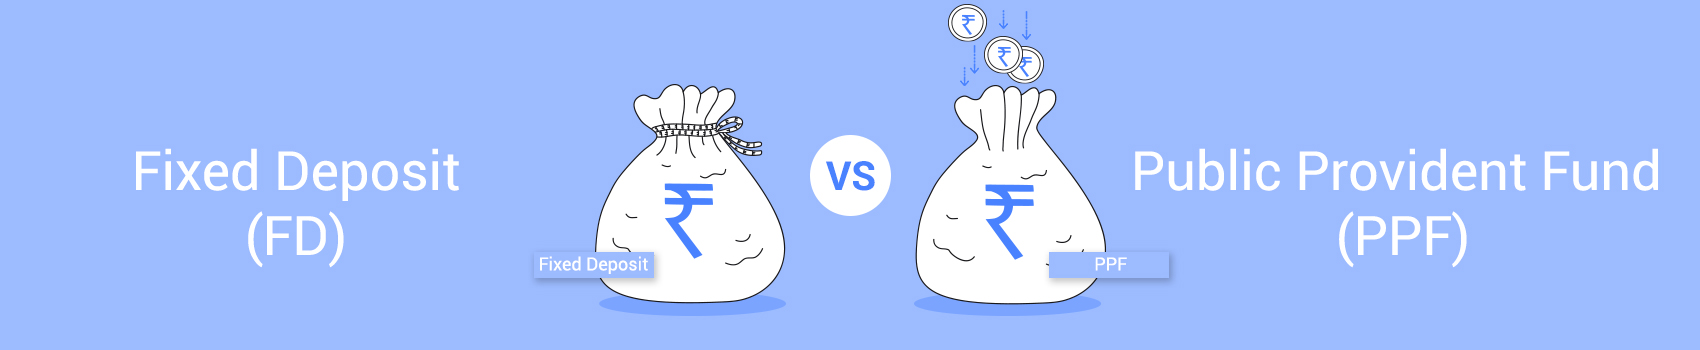 Fixed Deposit Vs Public Provident Fund: Which is Good?